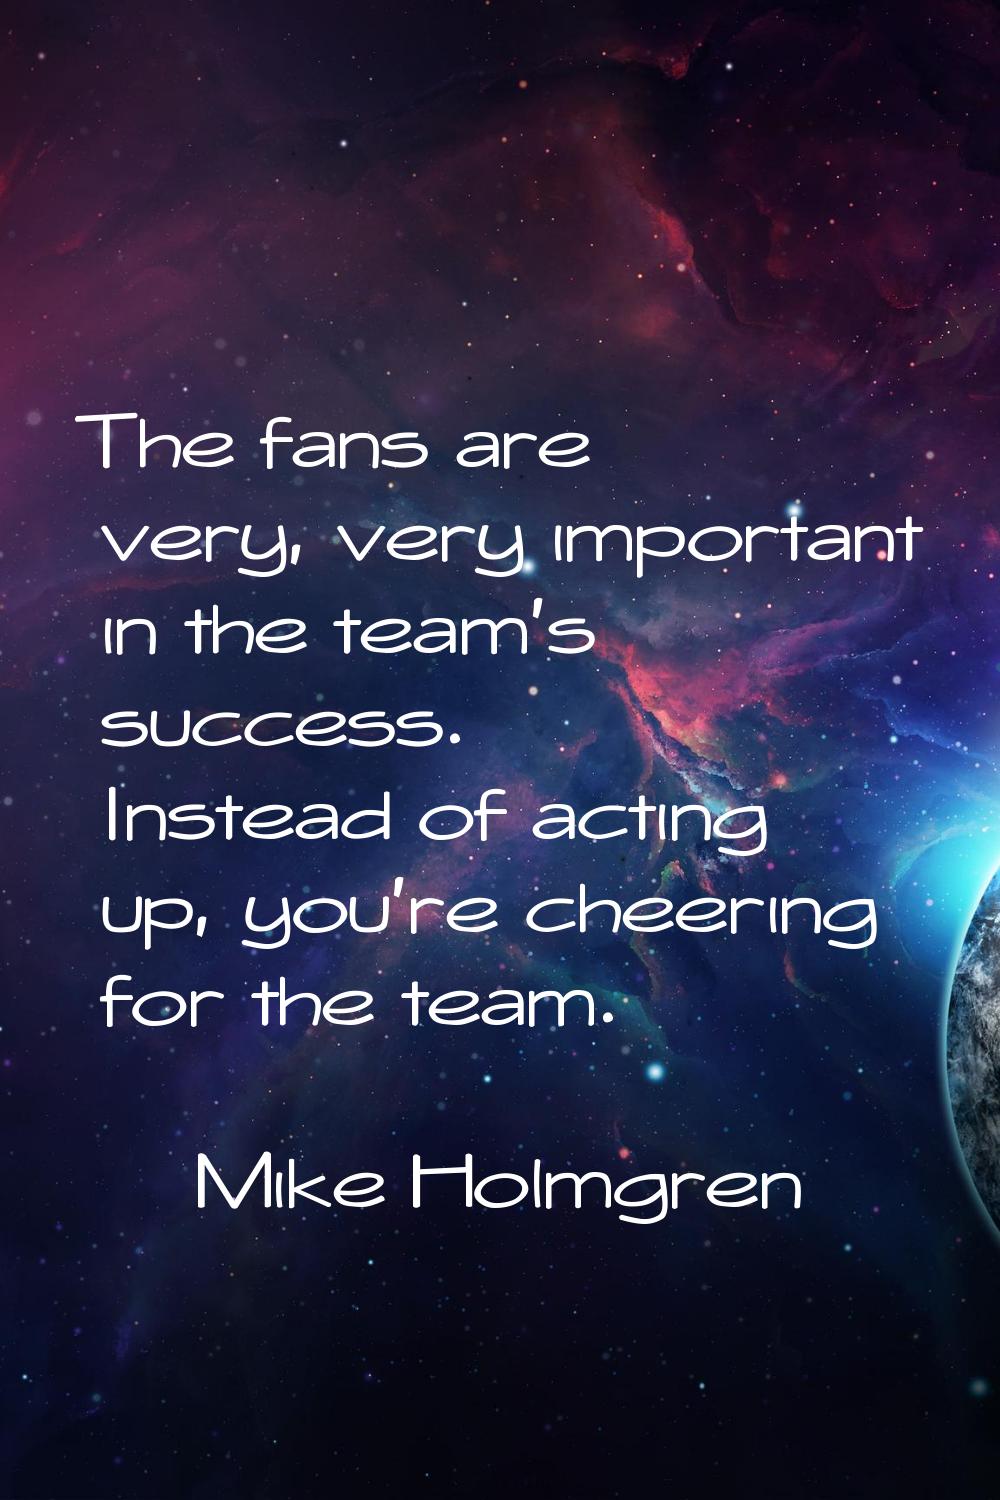 The fans are very, very important in the team's success. Instead of acting up, you're cheering for 